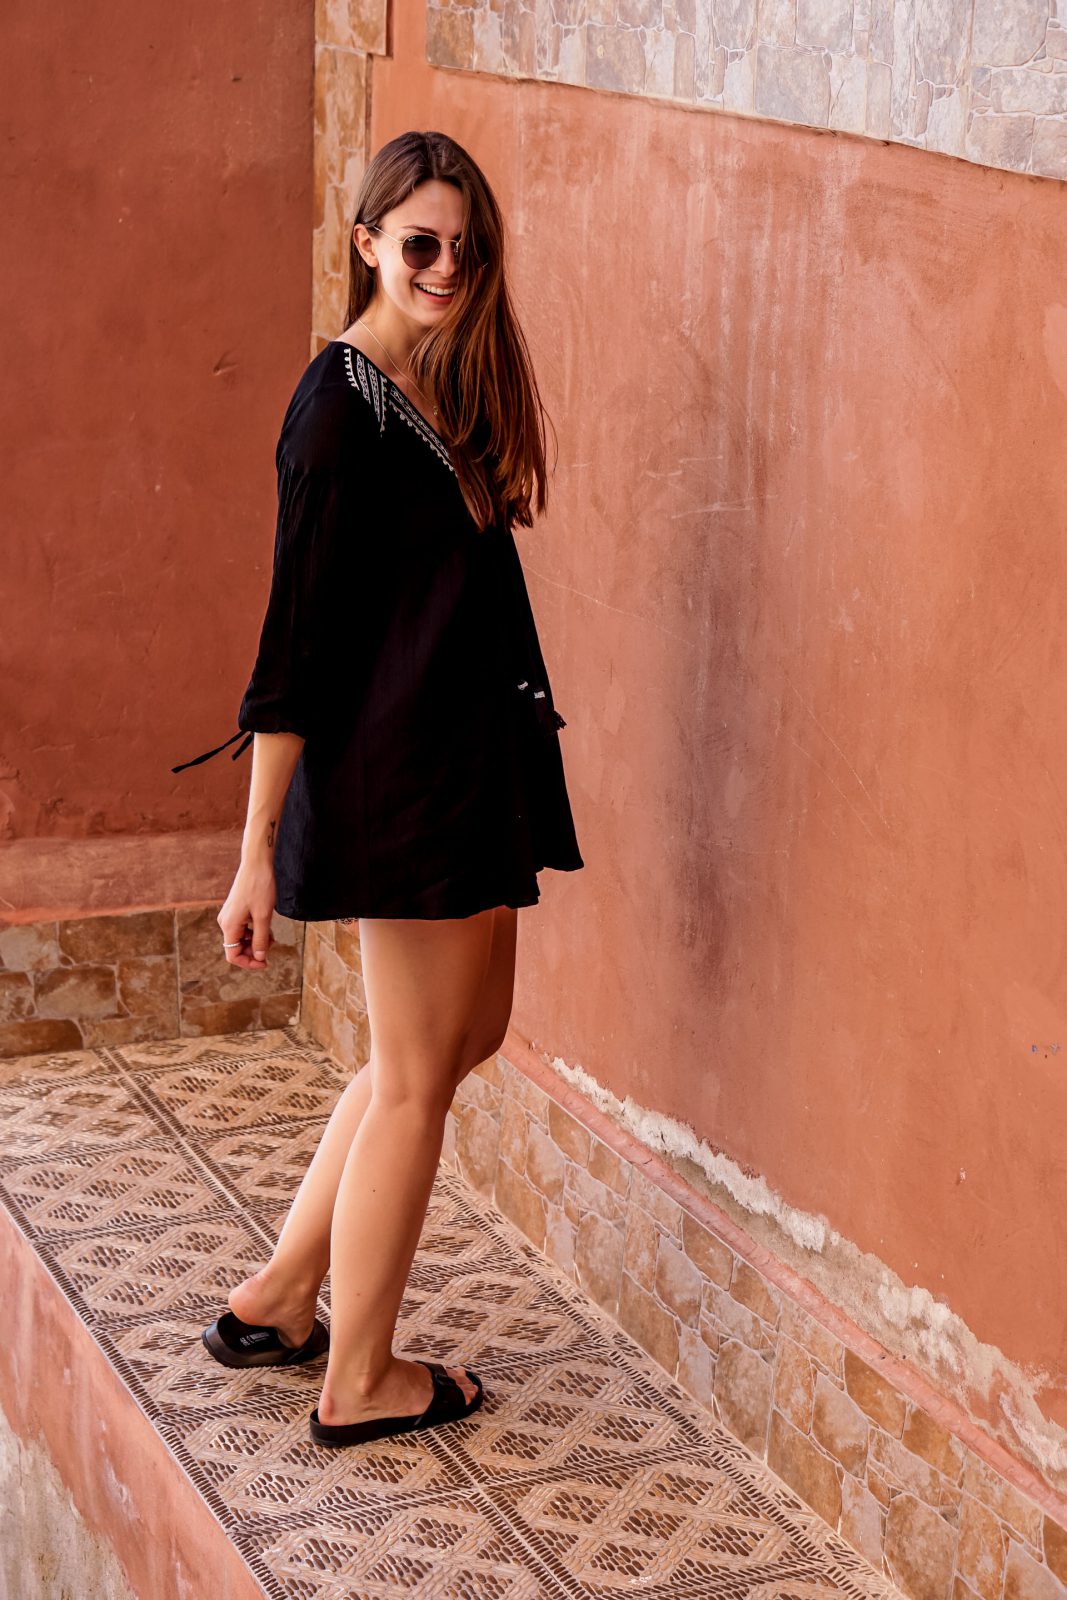 Colourful walls in Morocco and a black dress || Travel and Fashion Blog